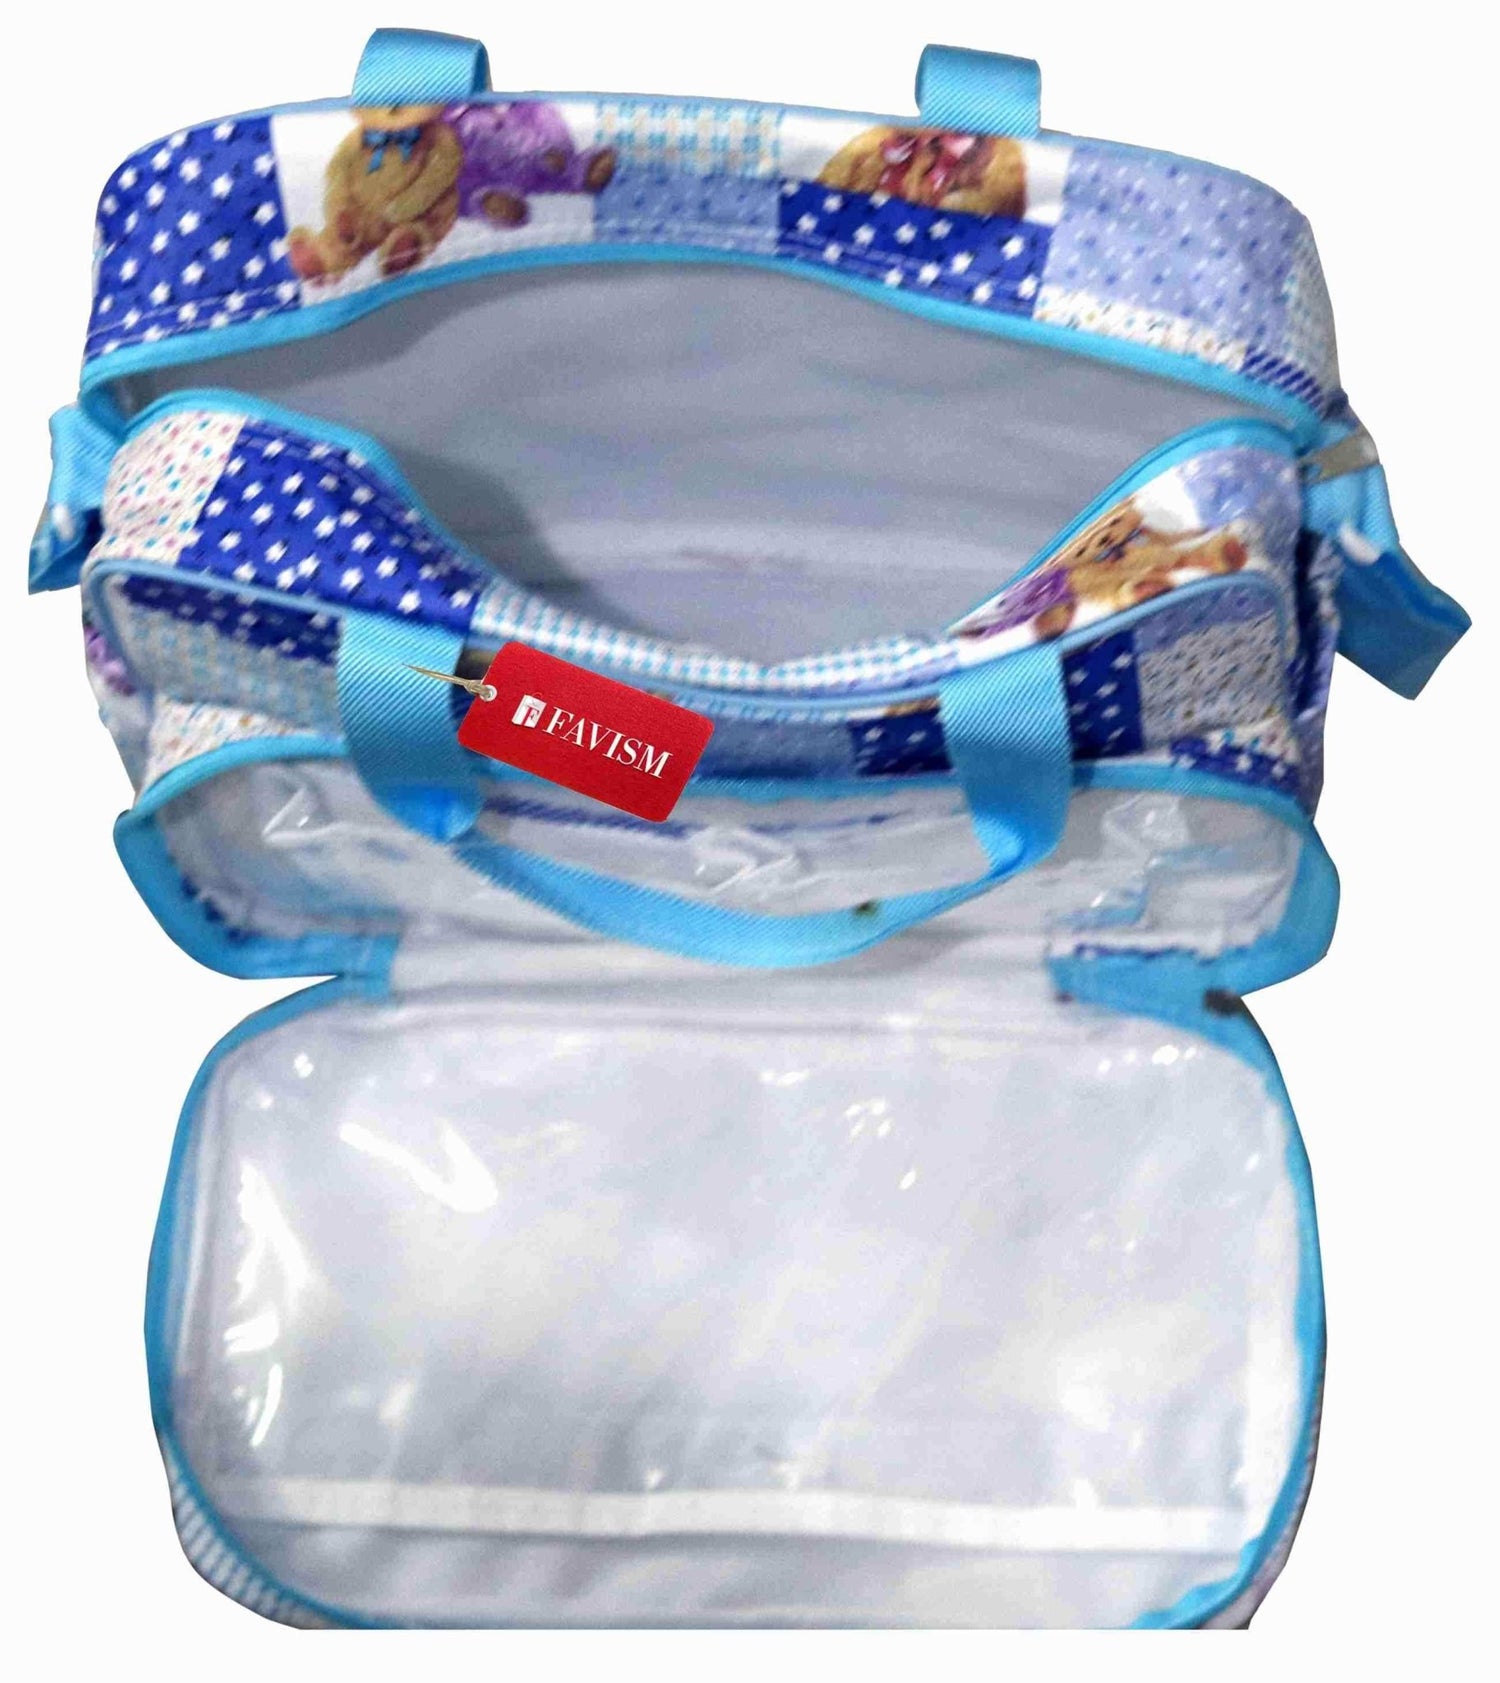 Toddler Diaper Bag Kit for Your Purse